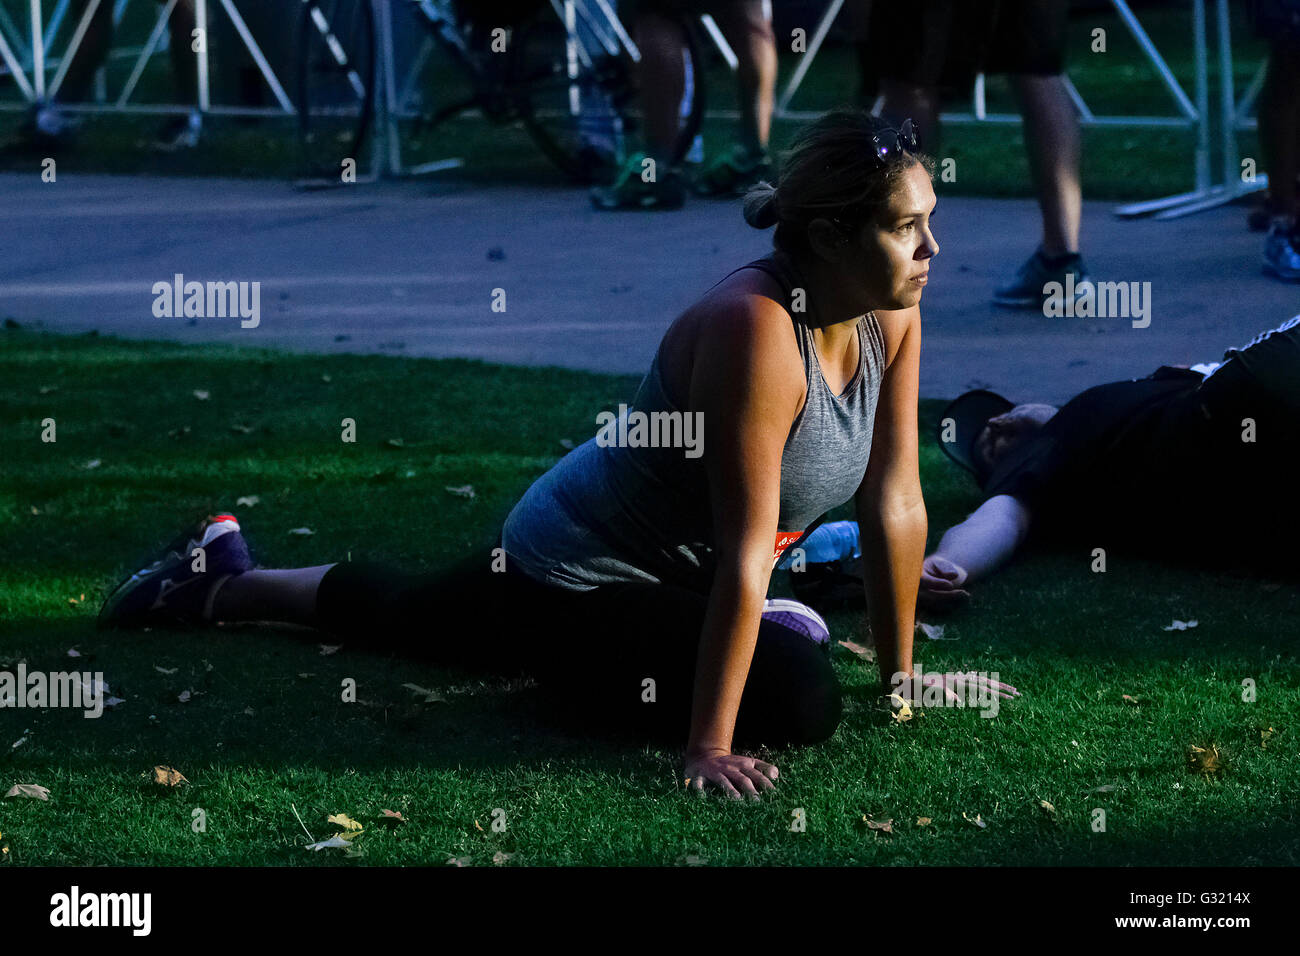 San Diego, California, USA. 5th June, 2016. SAN DIEGO CA, USA -- JUNE 2, 2016: .Kristin Monti from Las Vegas used the early arrival break to stretch before the start of the Suja Rock 'n' Roll San Diego half marathon in San Diego.Mandatory Credit: PHOTO BY NELVIN C. CEPEDA, SAN DIEGO UNION-TRIBUNE © Nelvin C. Cepeda/San Diego Union-Tribune/ZUMA Wire/Alamy Live News Stock Photo